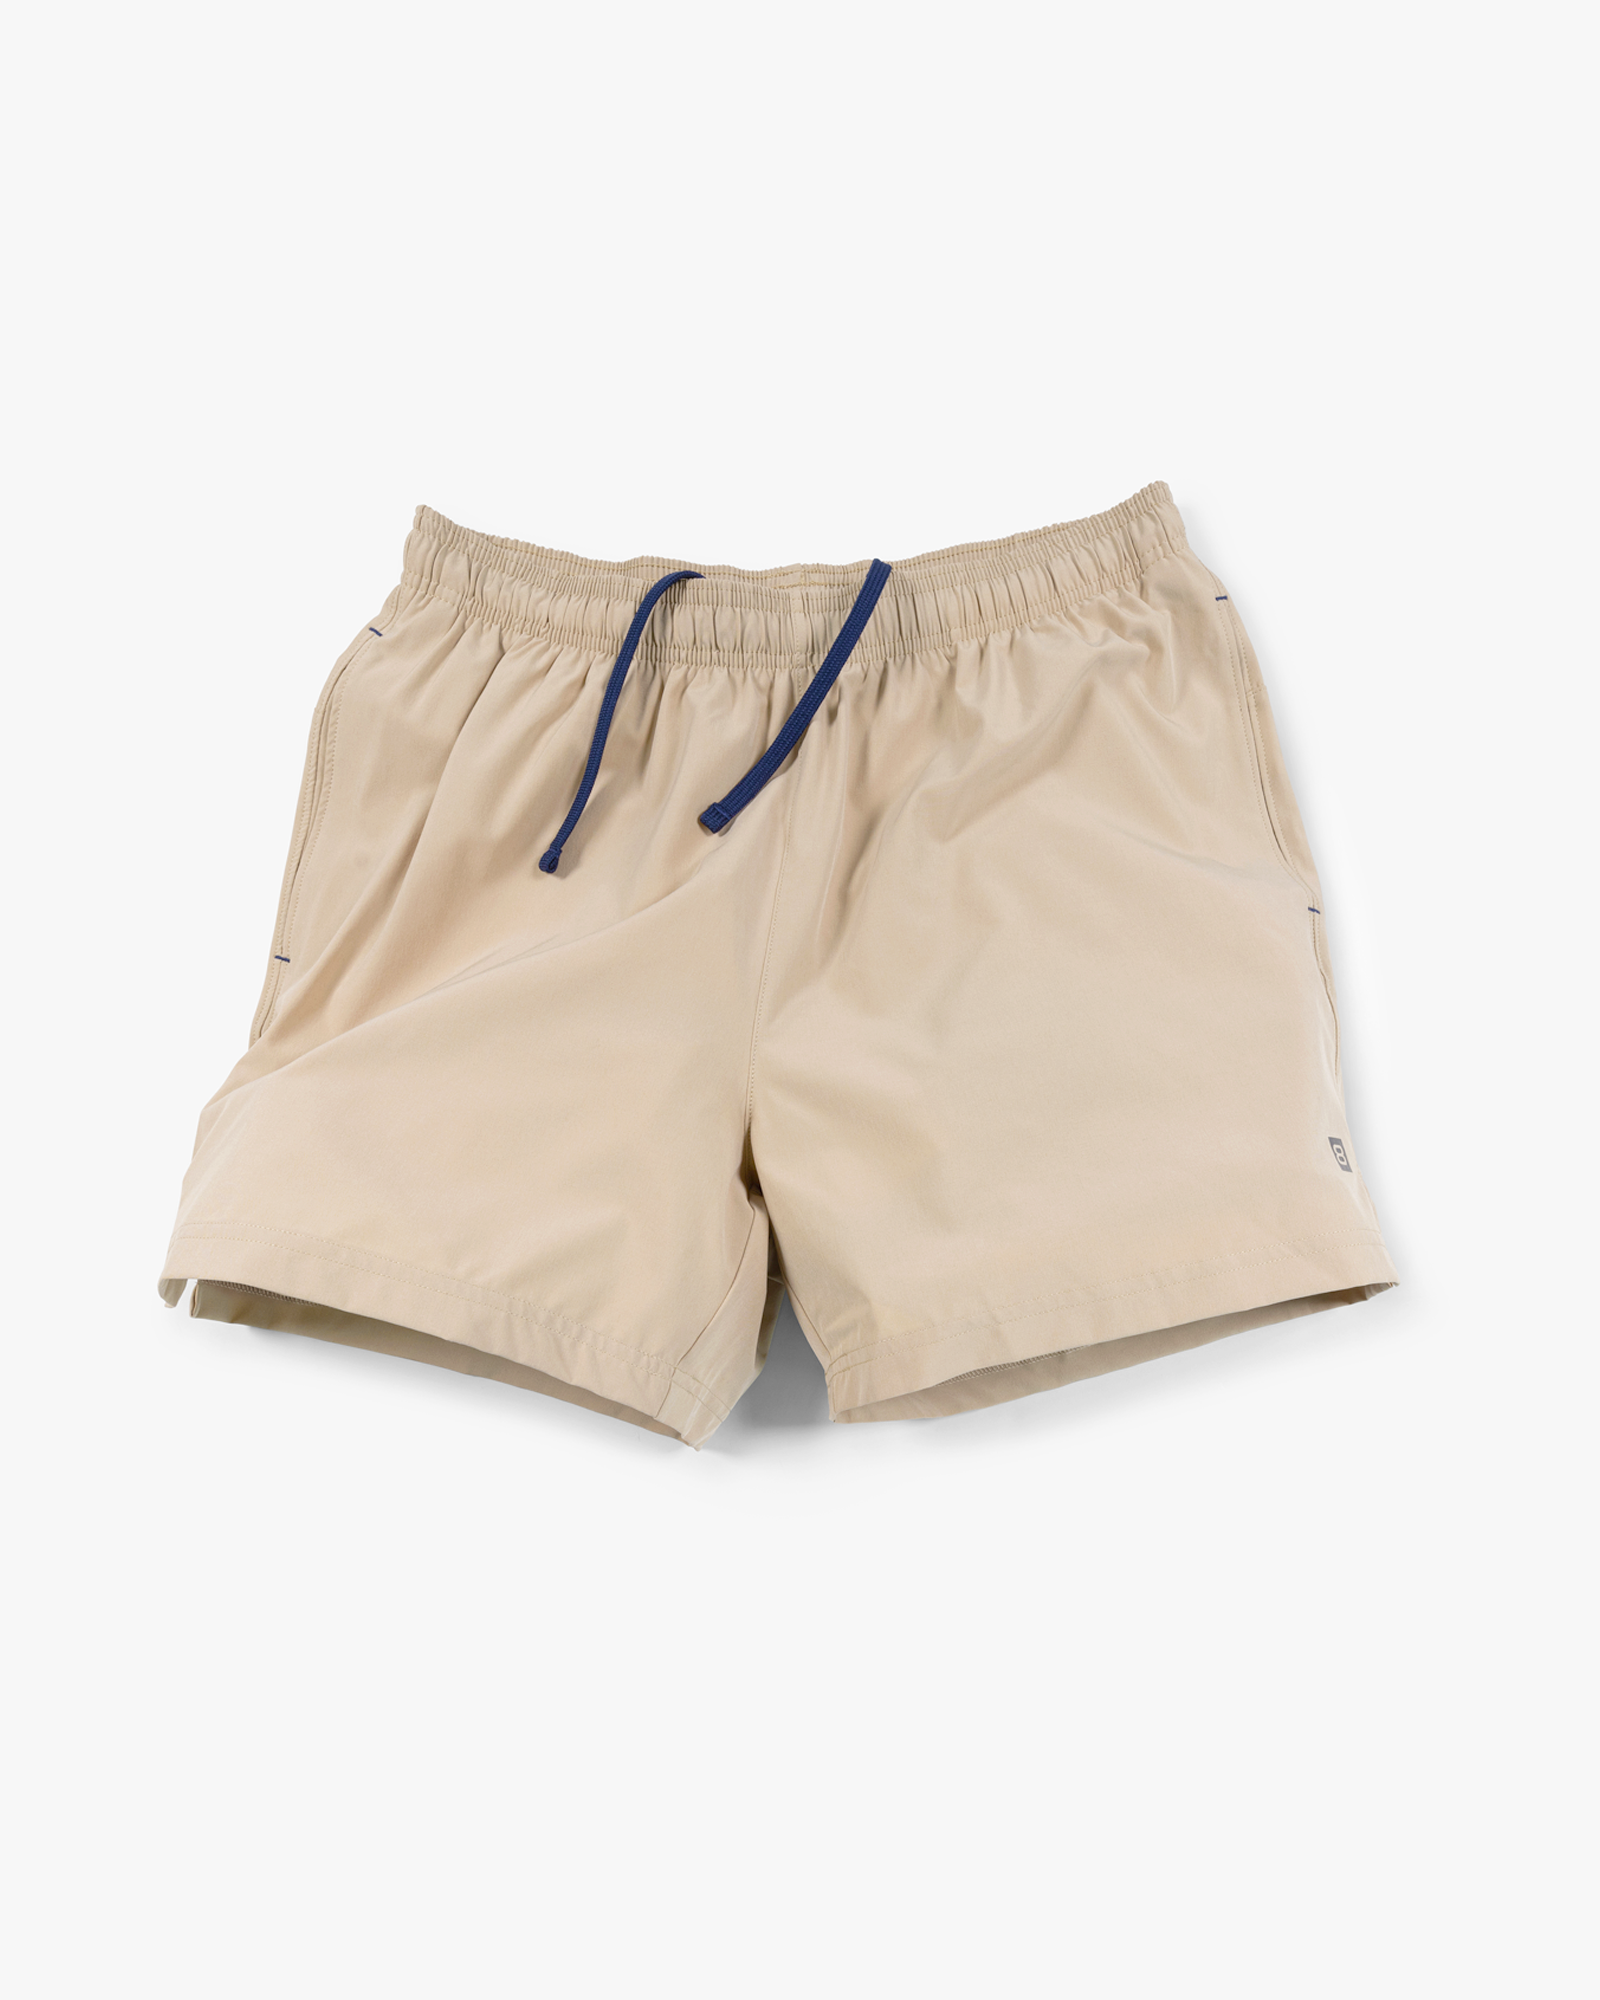 Athletic Shorts By Tek Gear Size: 3x – Clothes Mentor West Chester PA #178